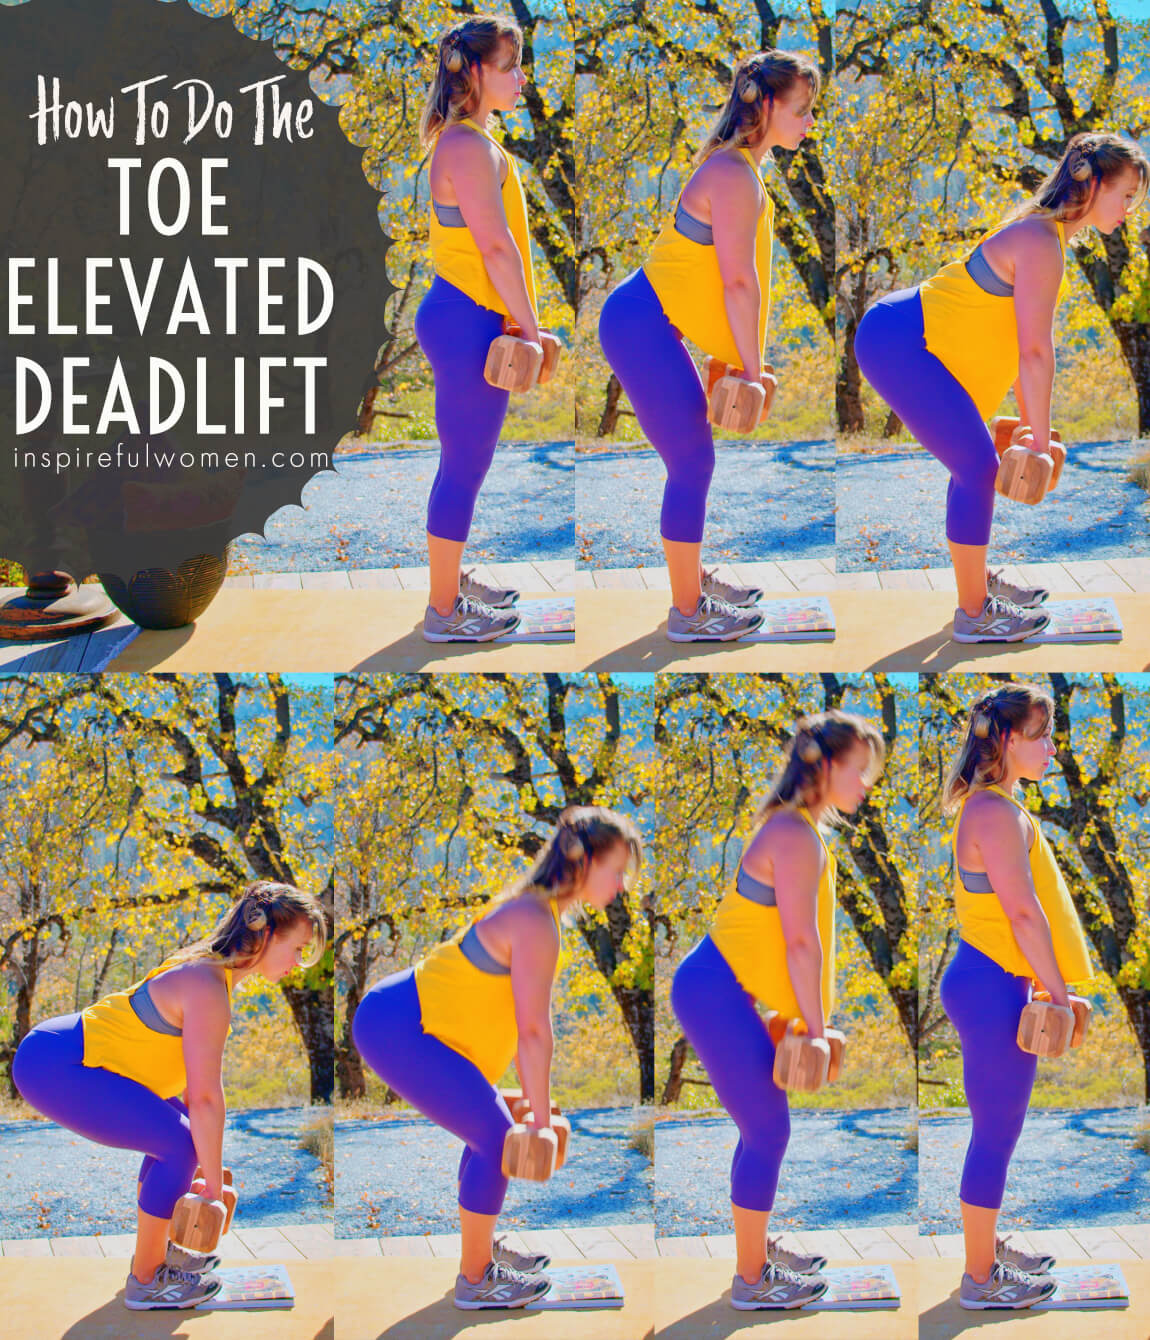 how-to-toe-elevated-dumbbell-deadlift-at-home-lower-body-exercise-for-women-proper-form